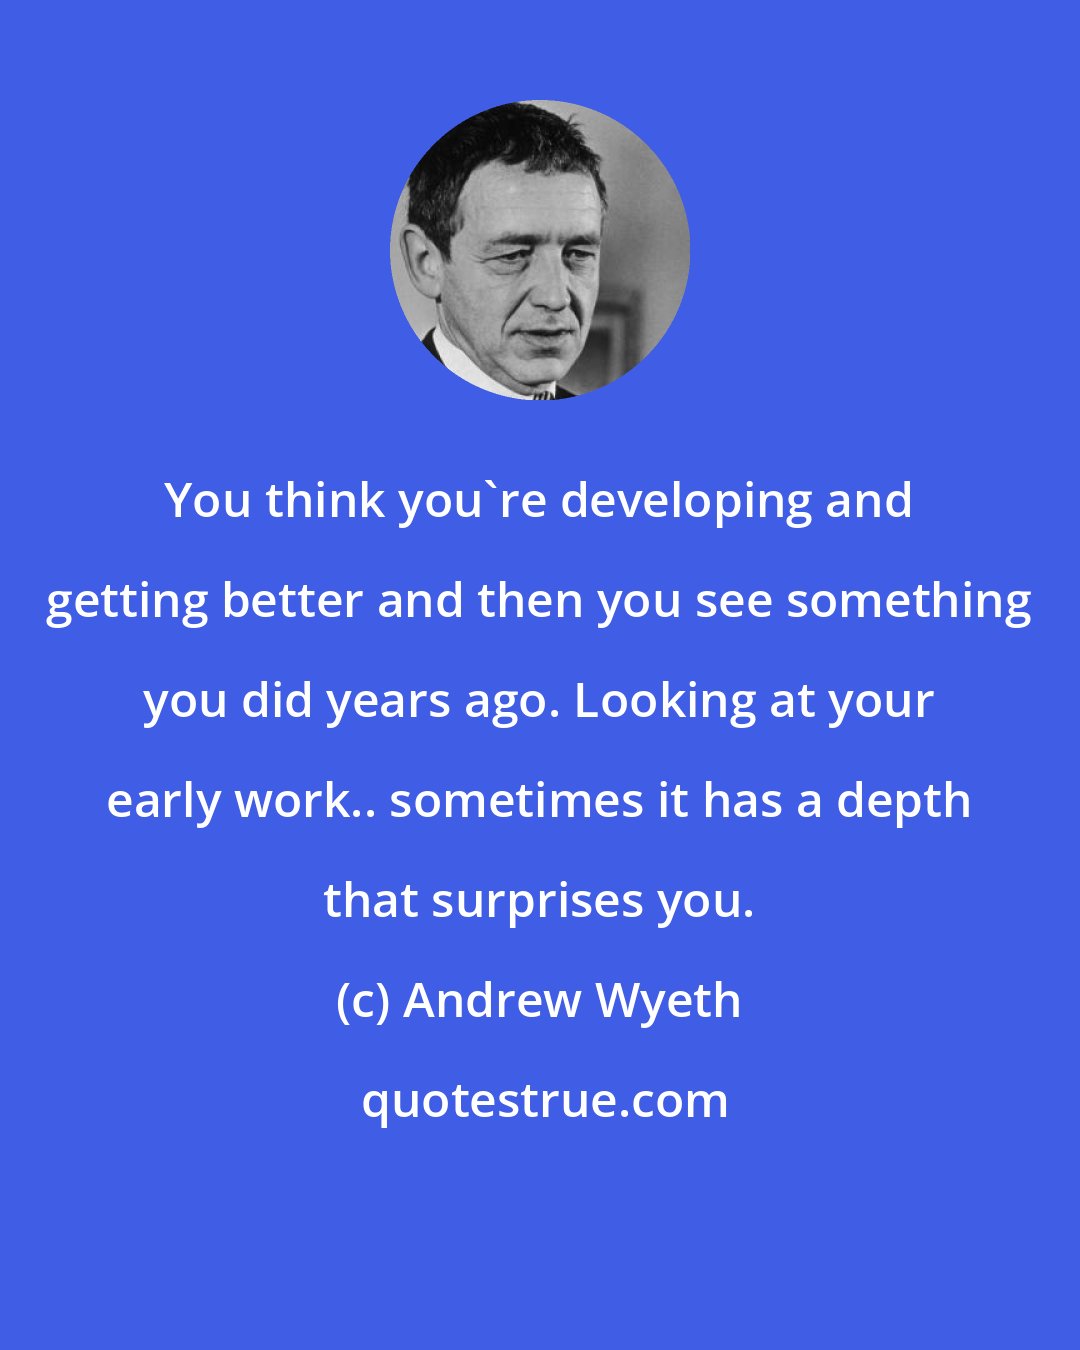 Andrew Wyeth: You think you're developing and getting better and then you see something you did years ago. Looking at your early work.. sometimes it has a depth that surprises you.